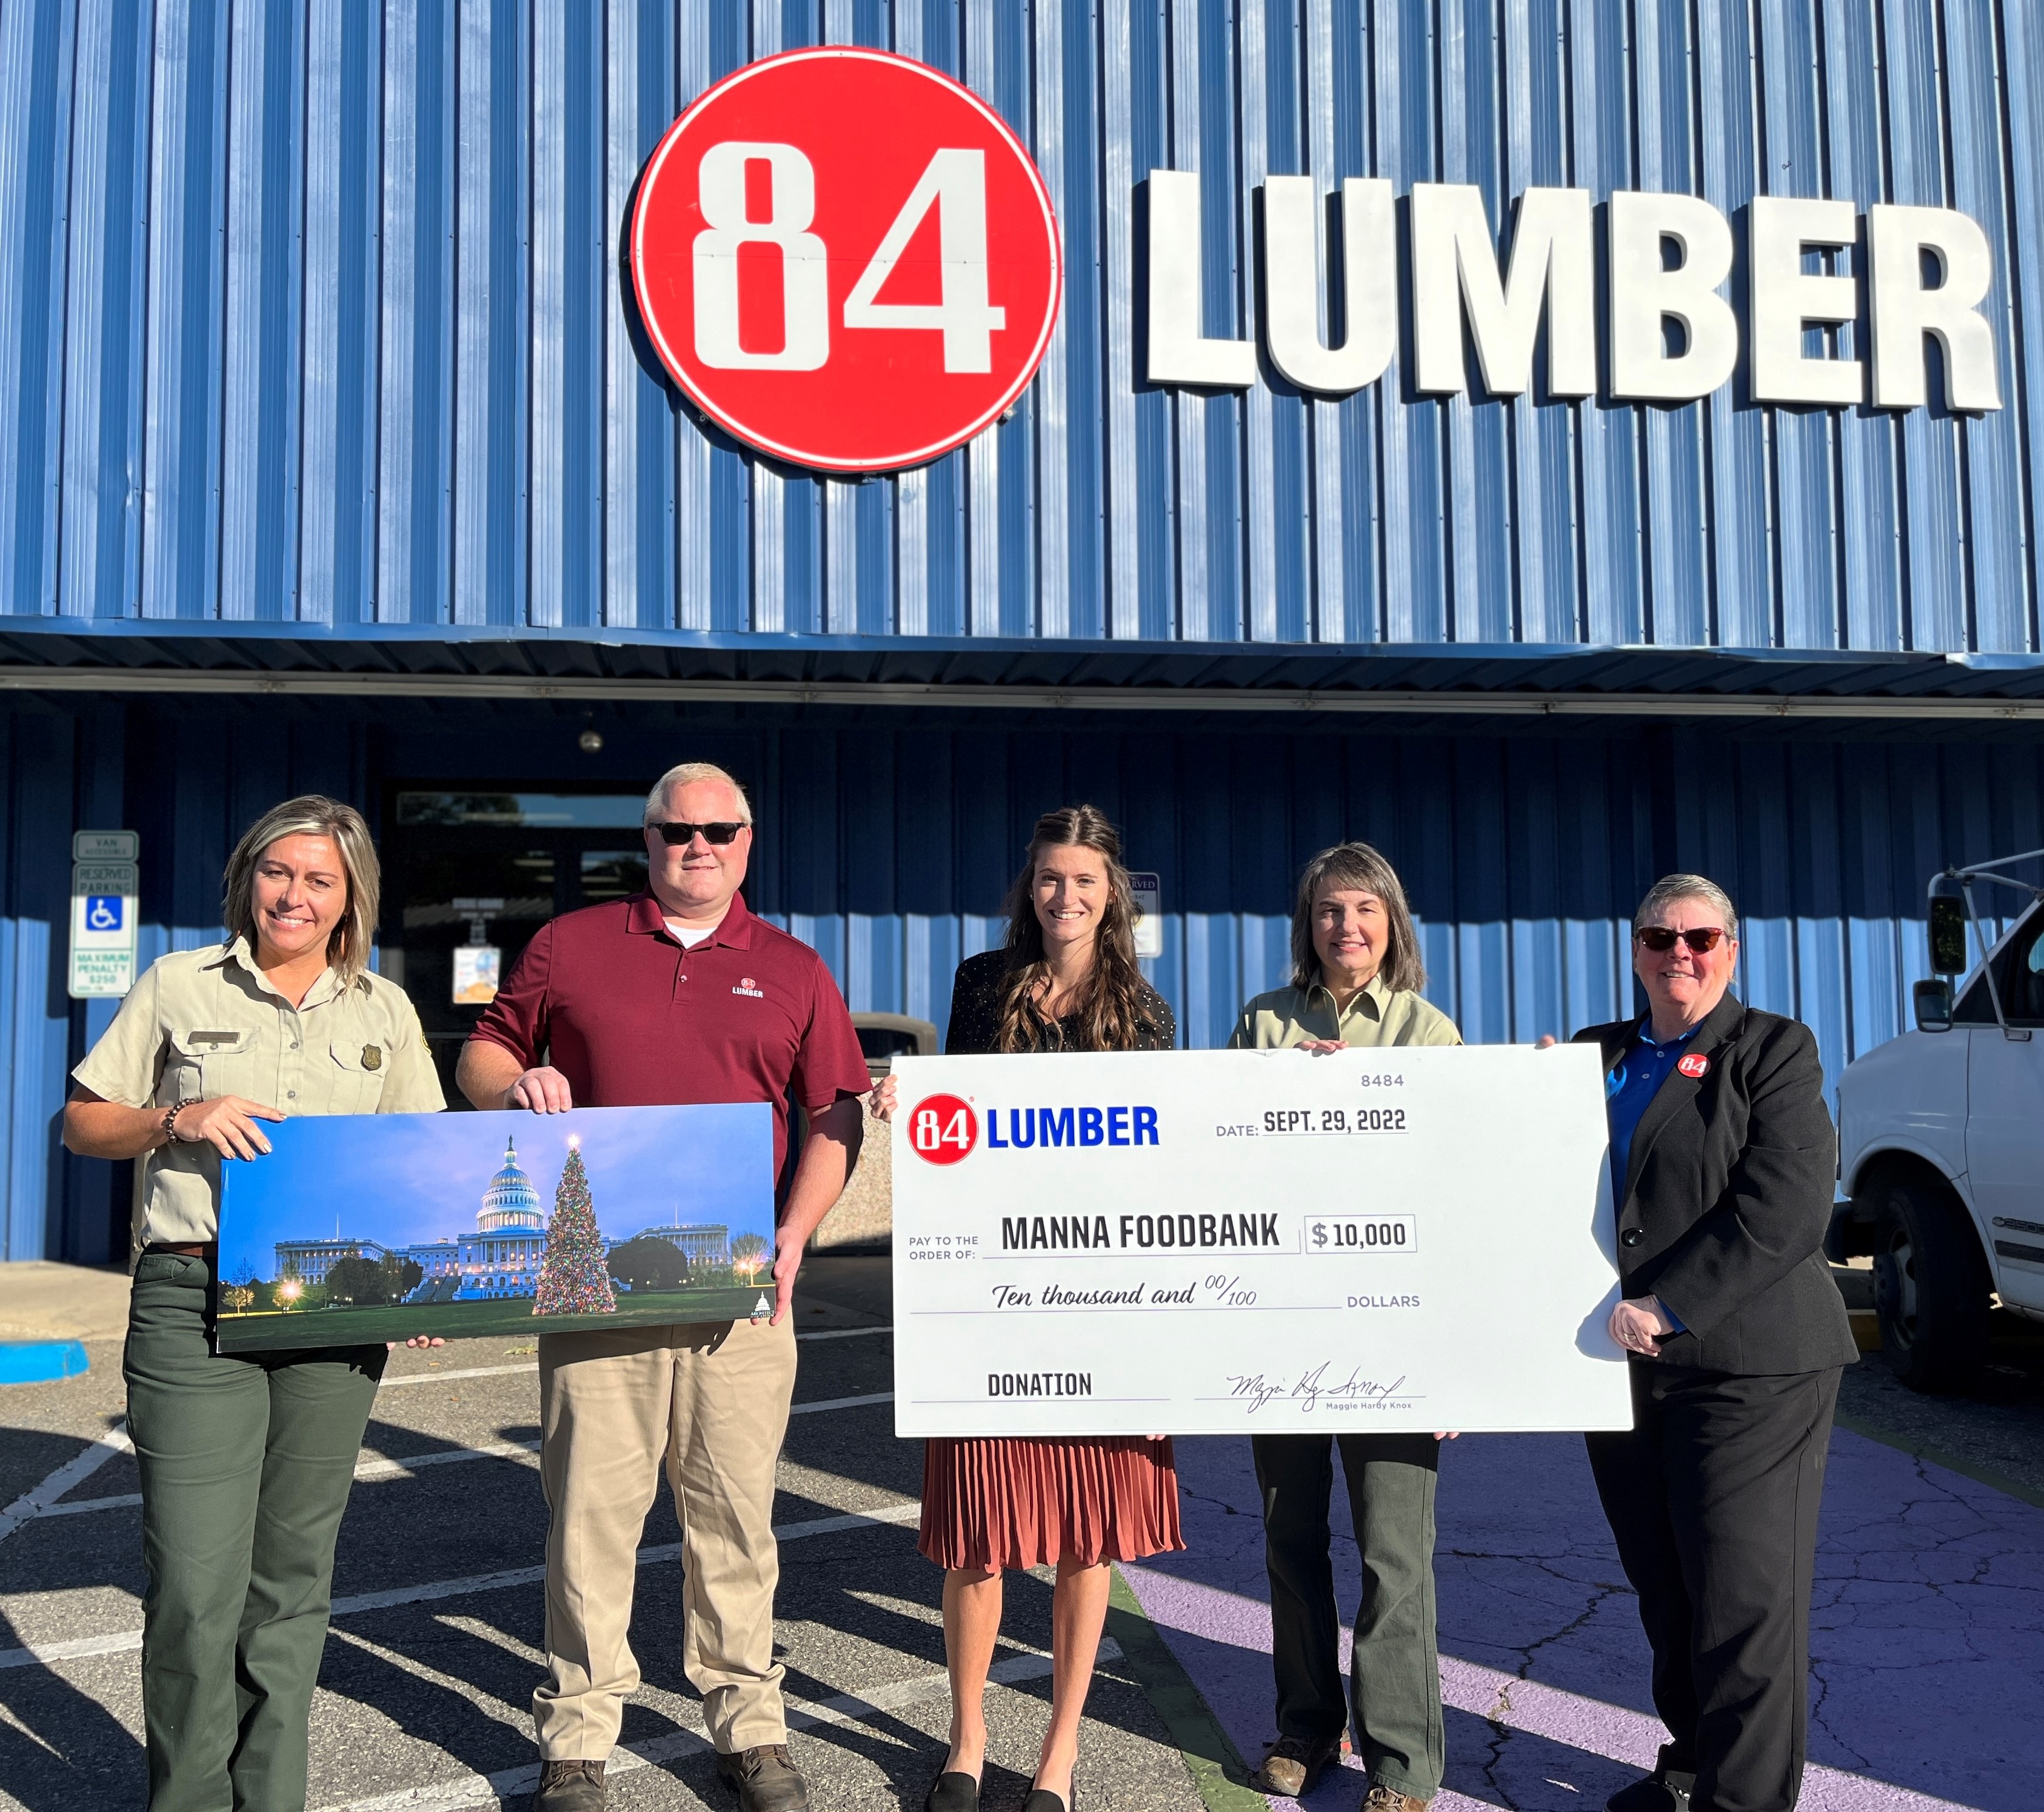 84 Lumber Donates $10,000 to MANNA FoodBank in Asheville, NC